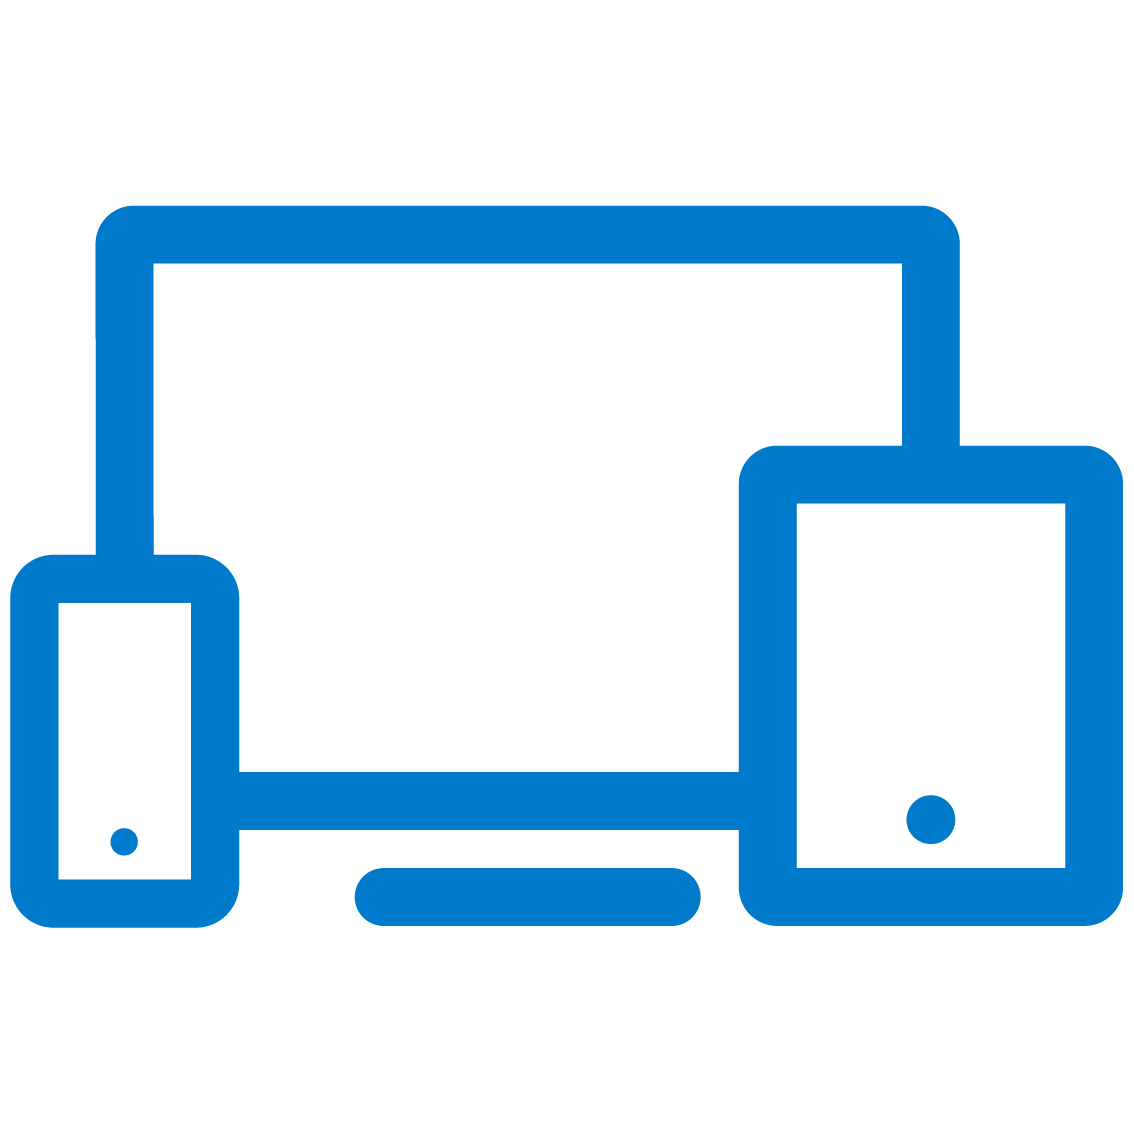 Blue mobile phone icon, blue laptop icon and blue tablet icon